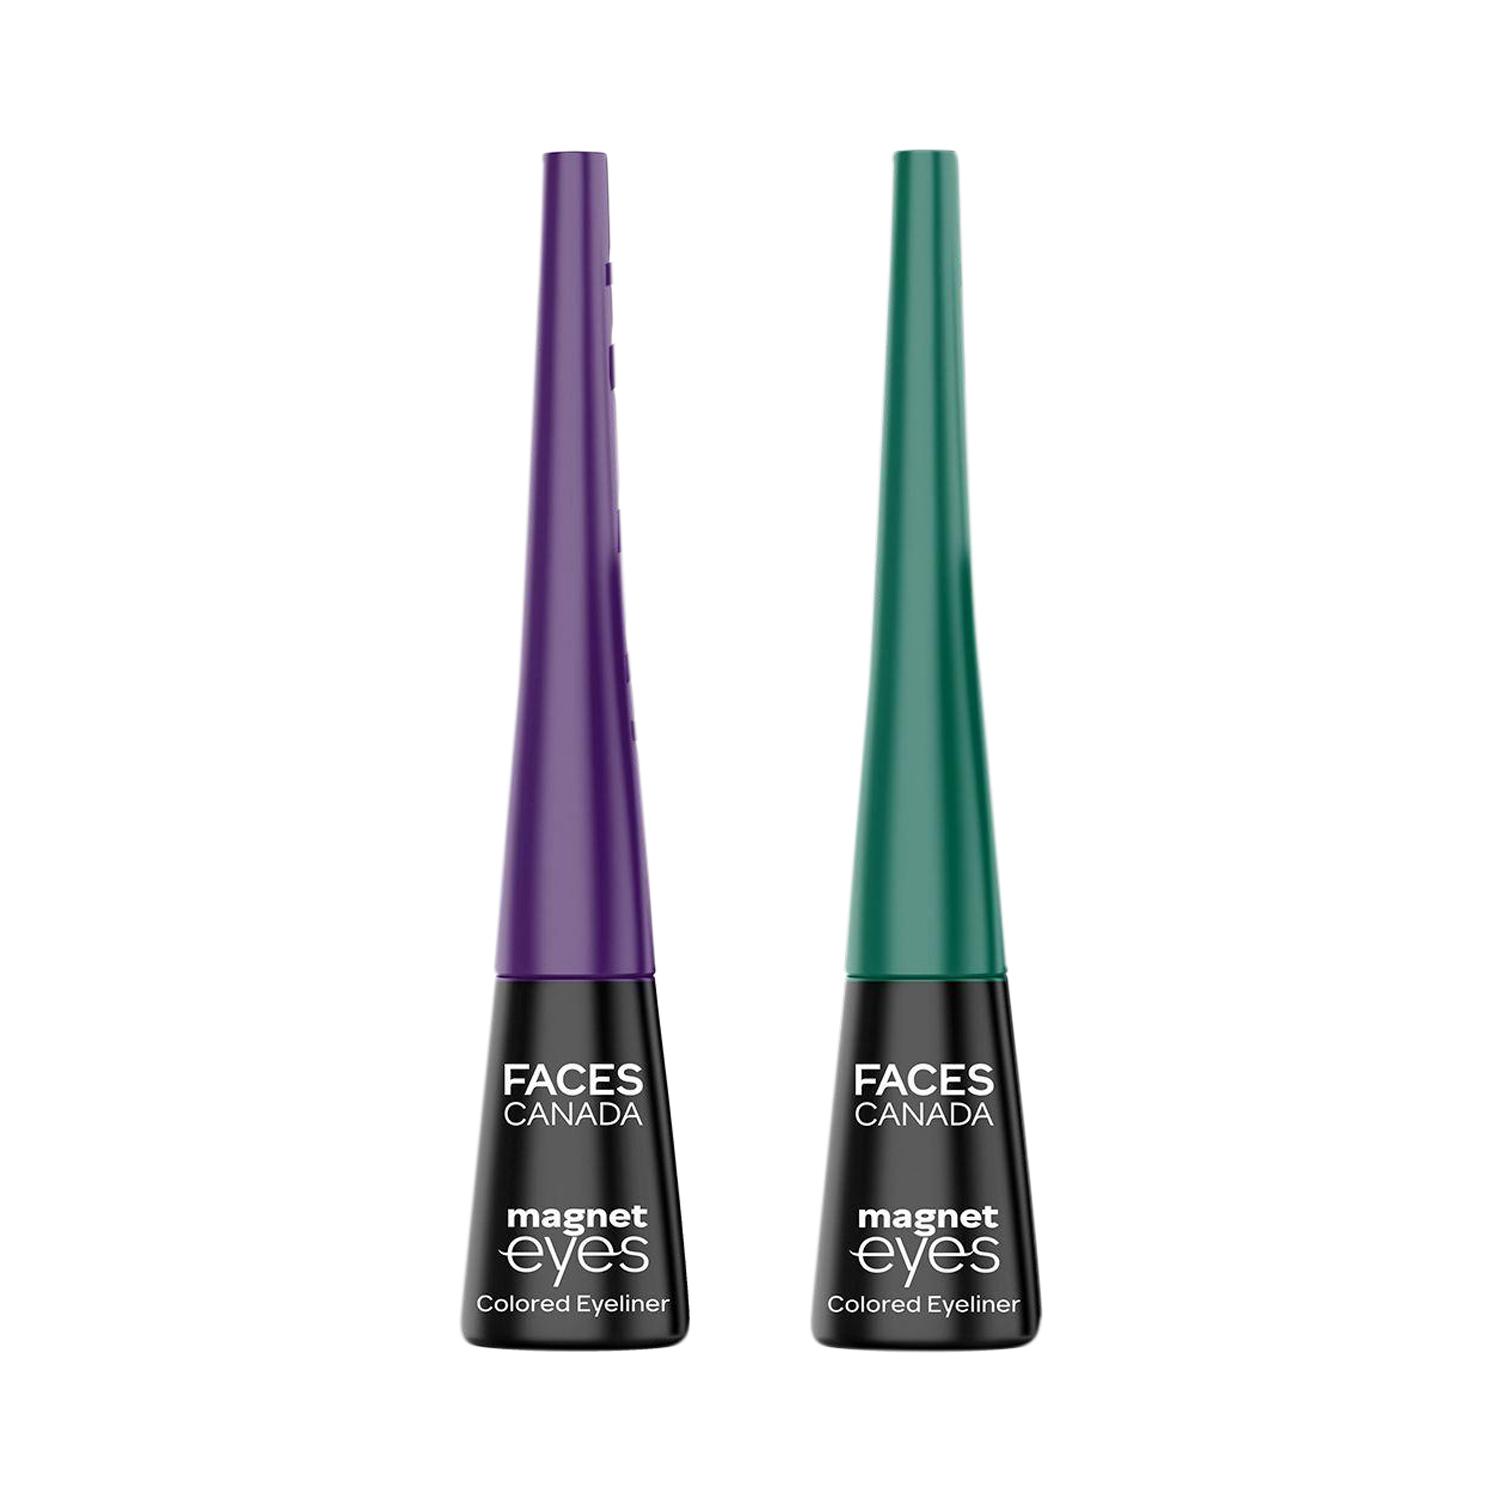 Faces Canada | Faces Canada Magneteyes Color Eyeliners Combo - Dramatic Purple and Elegant Green (Pack of 2)